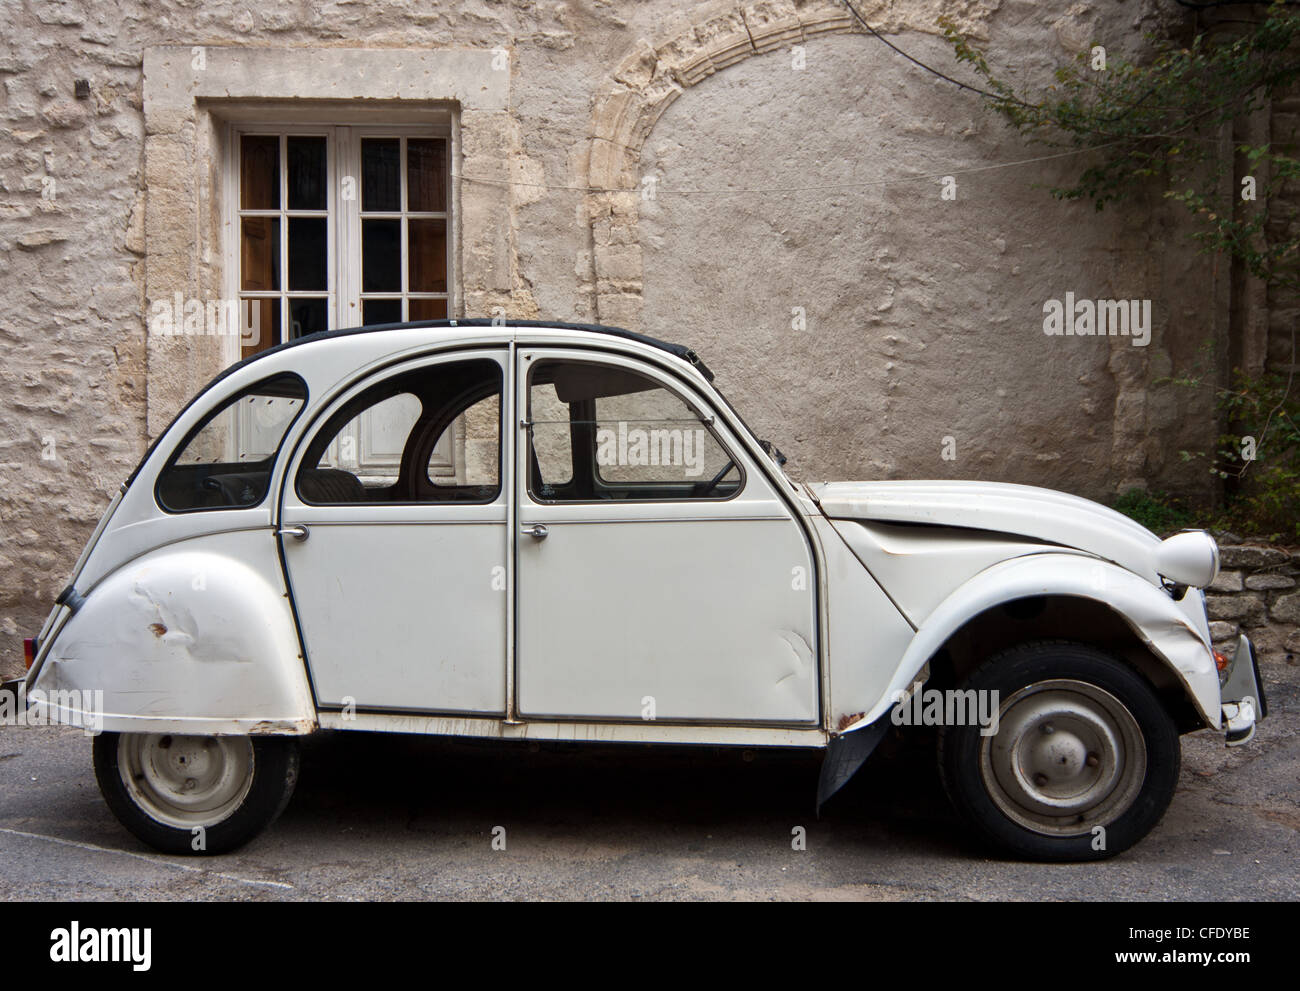 A slightly dented white Citroën 2CV parked in a quiet village in Provence, France (Saignon). Stock Photo